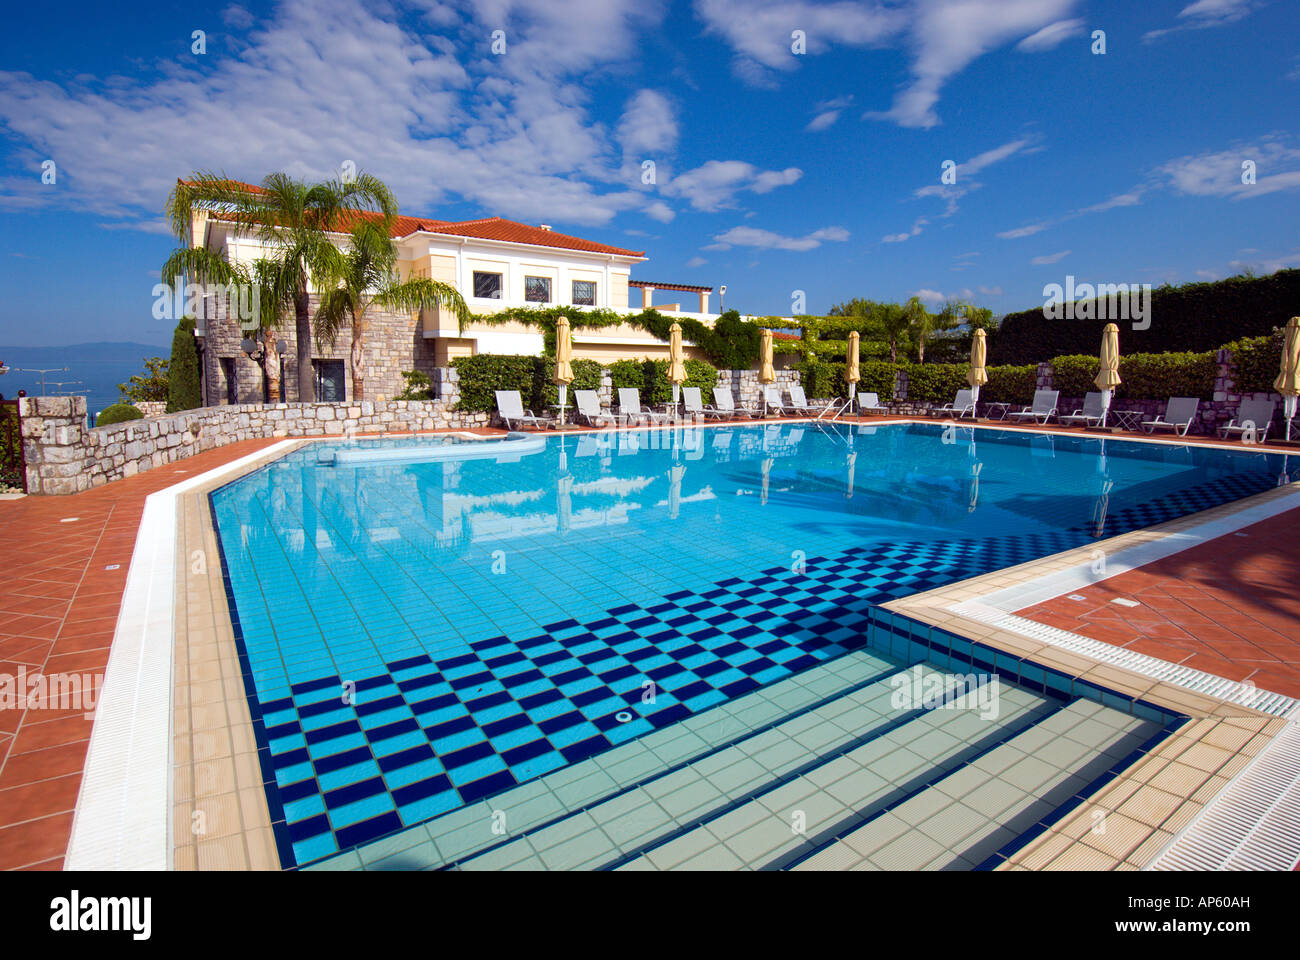 The pool area of the Akti Taygetos hotel and Resort in Kalamata Greece Stock Photo